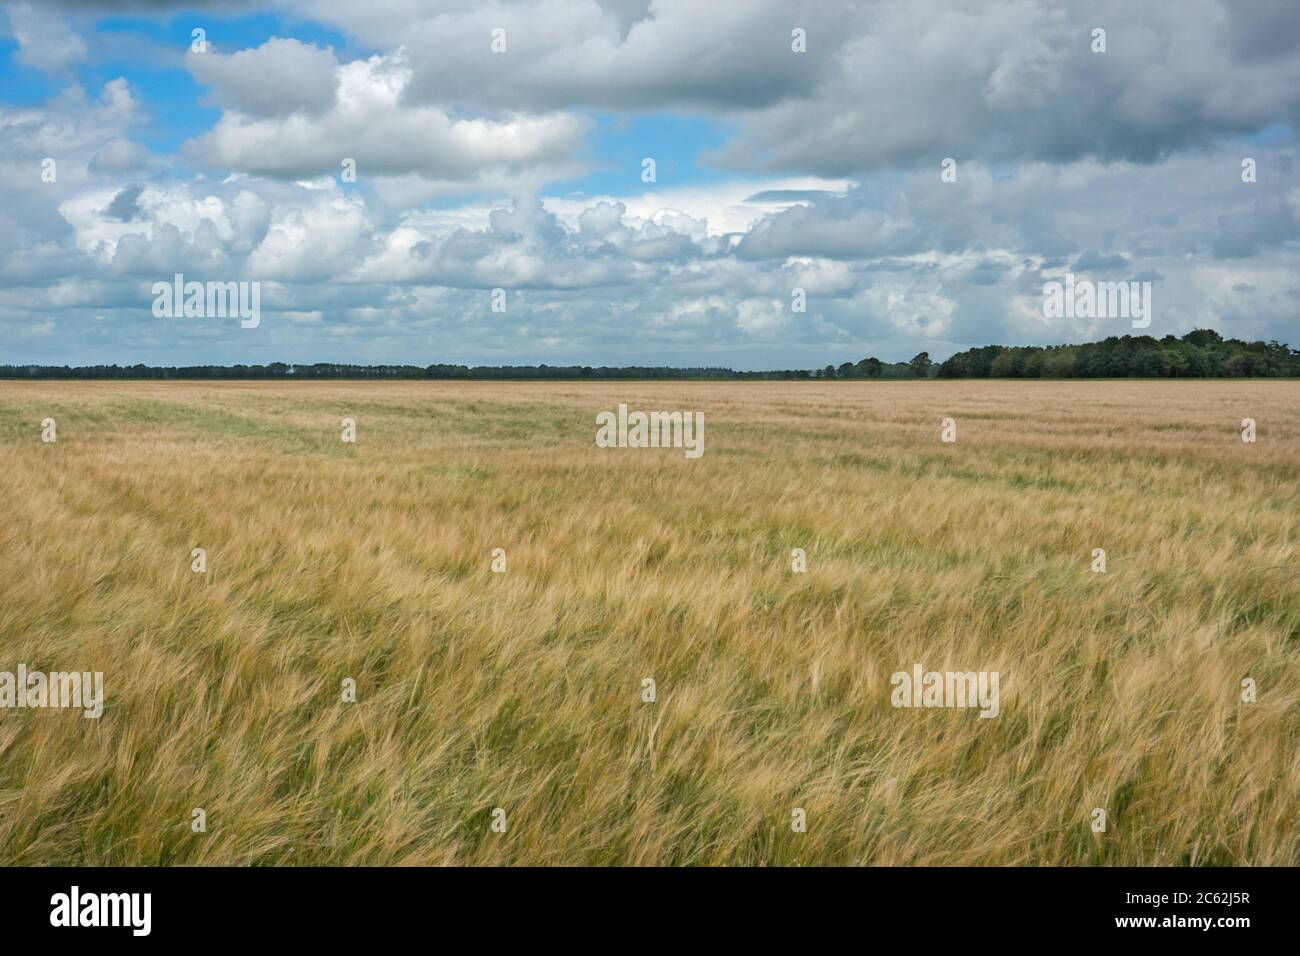 Field of Barley, Hordeum vulgare, under a blue sky with dark clouds Stock Photo